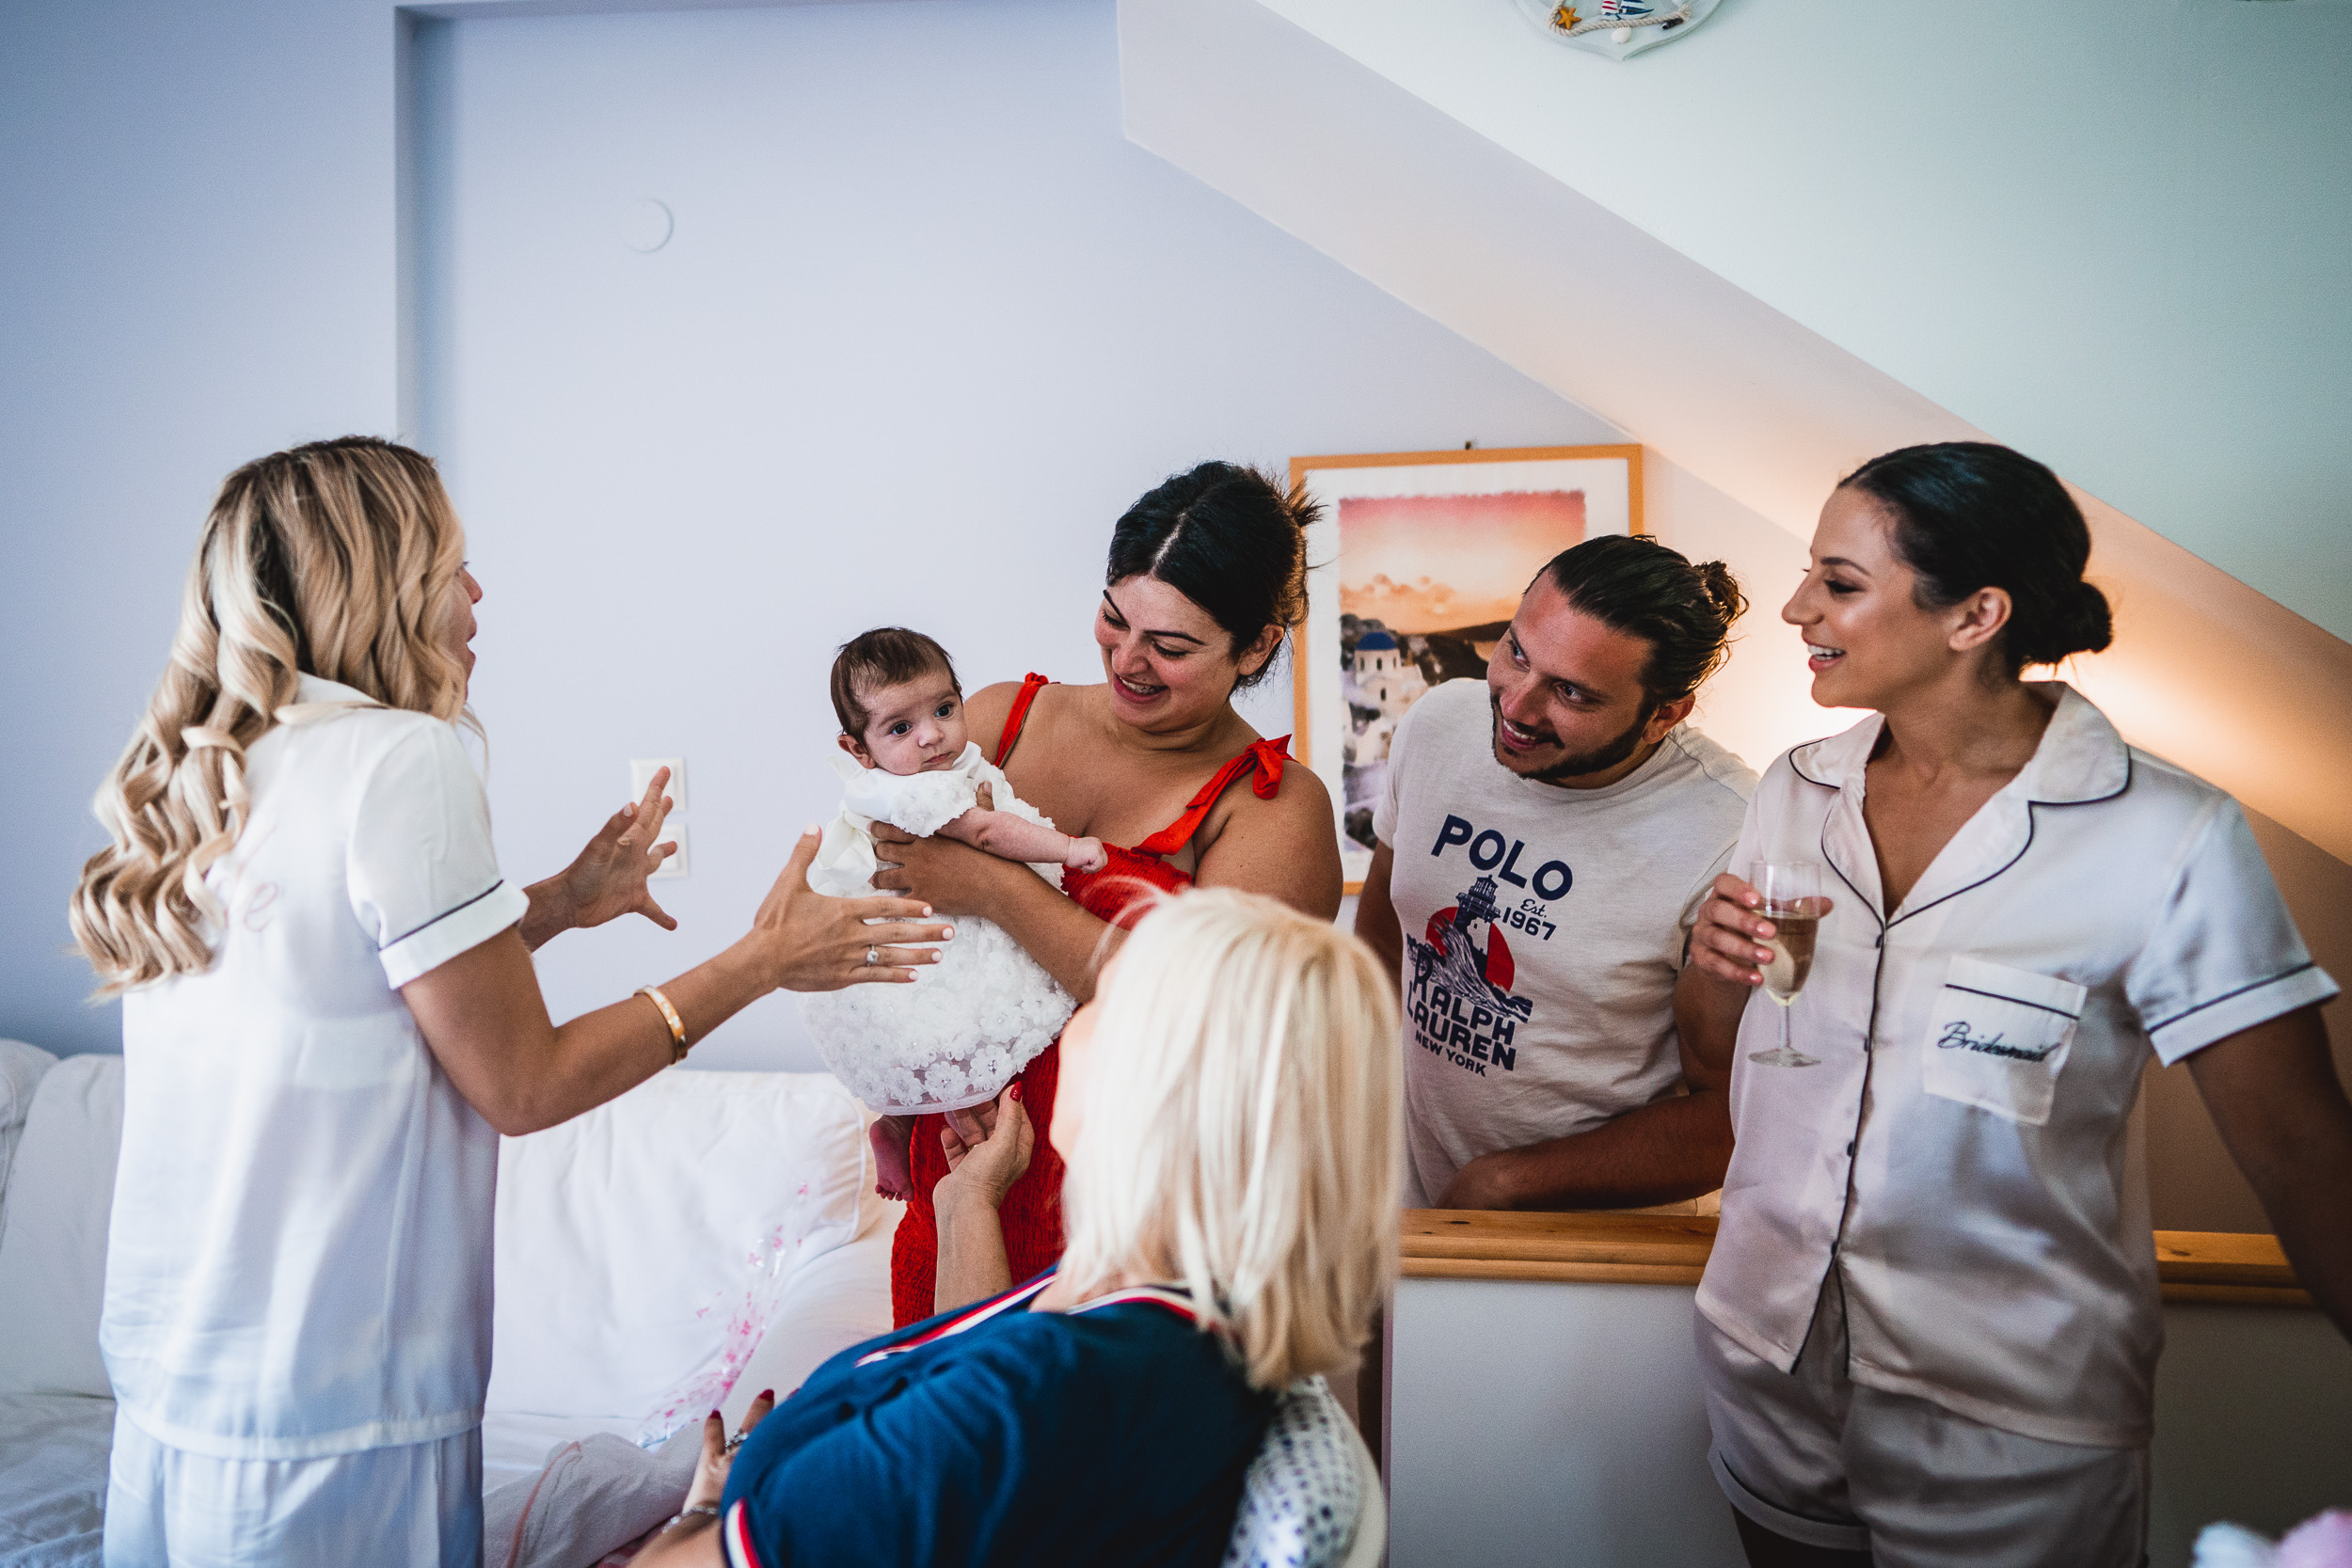 A group of people, including the groom and wedding photographer, standing around a baby in a room.